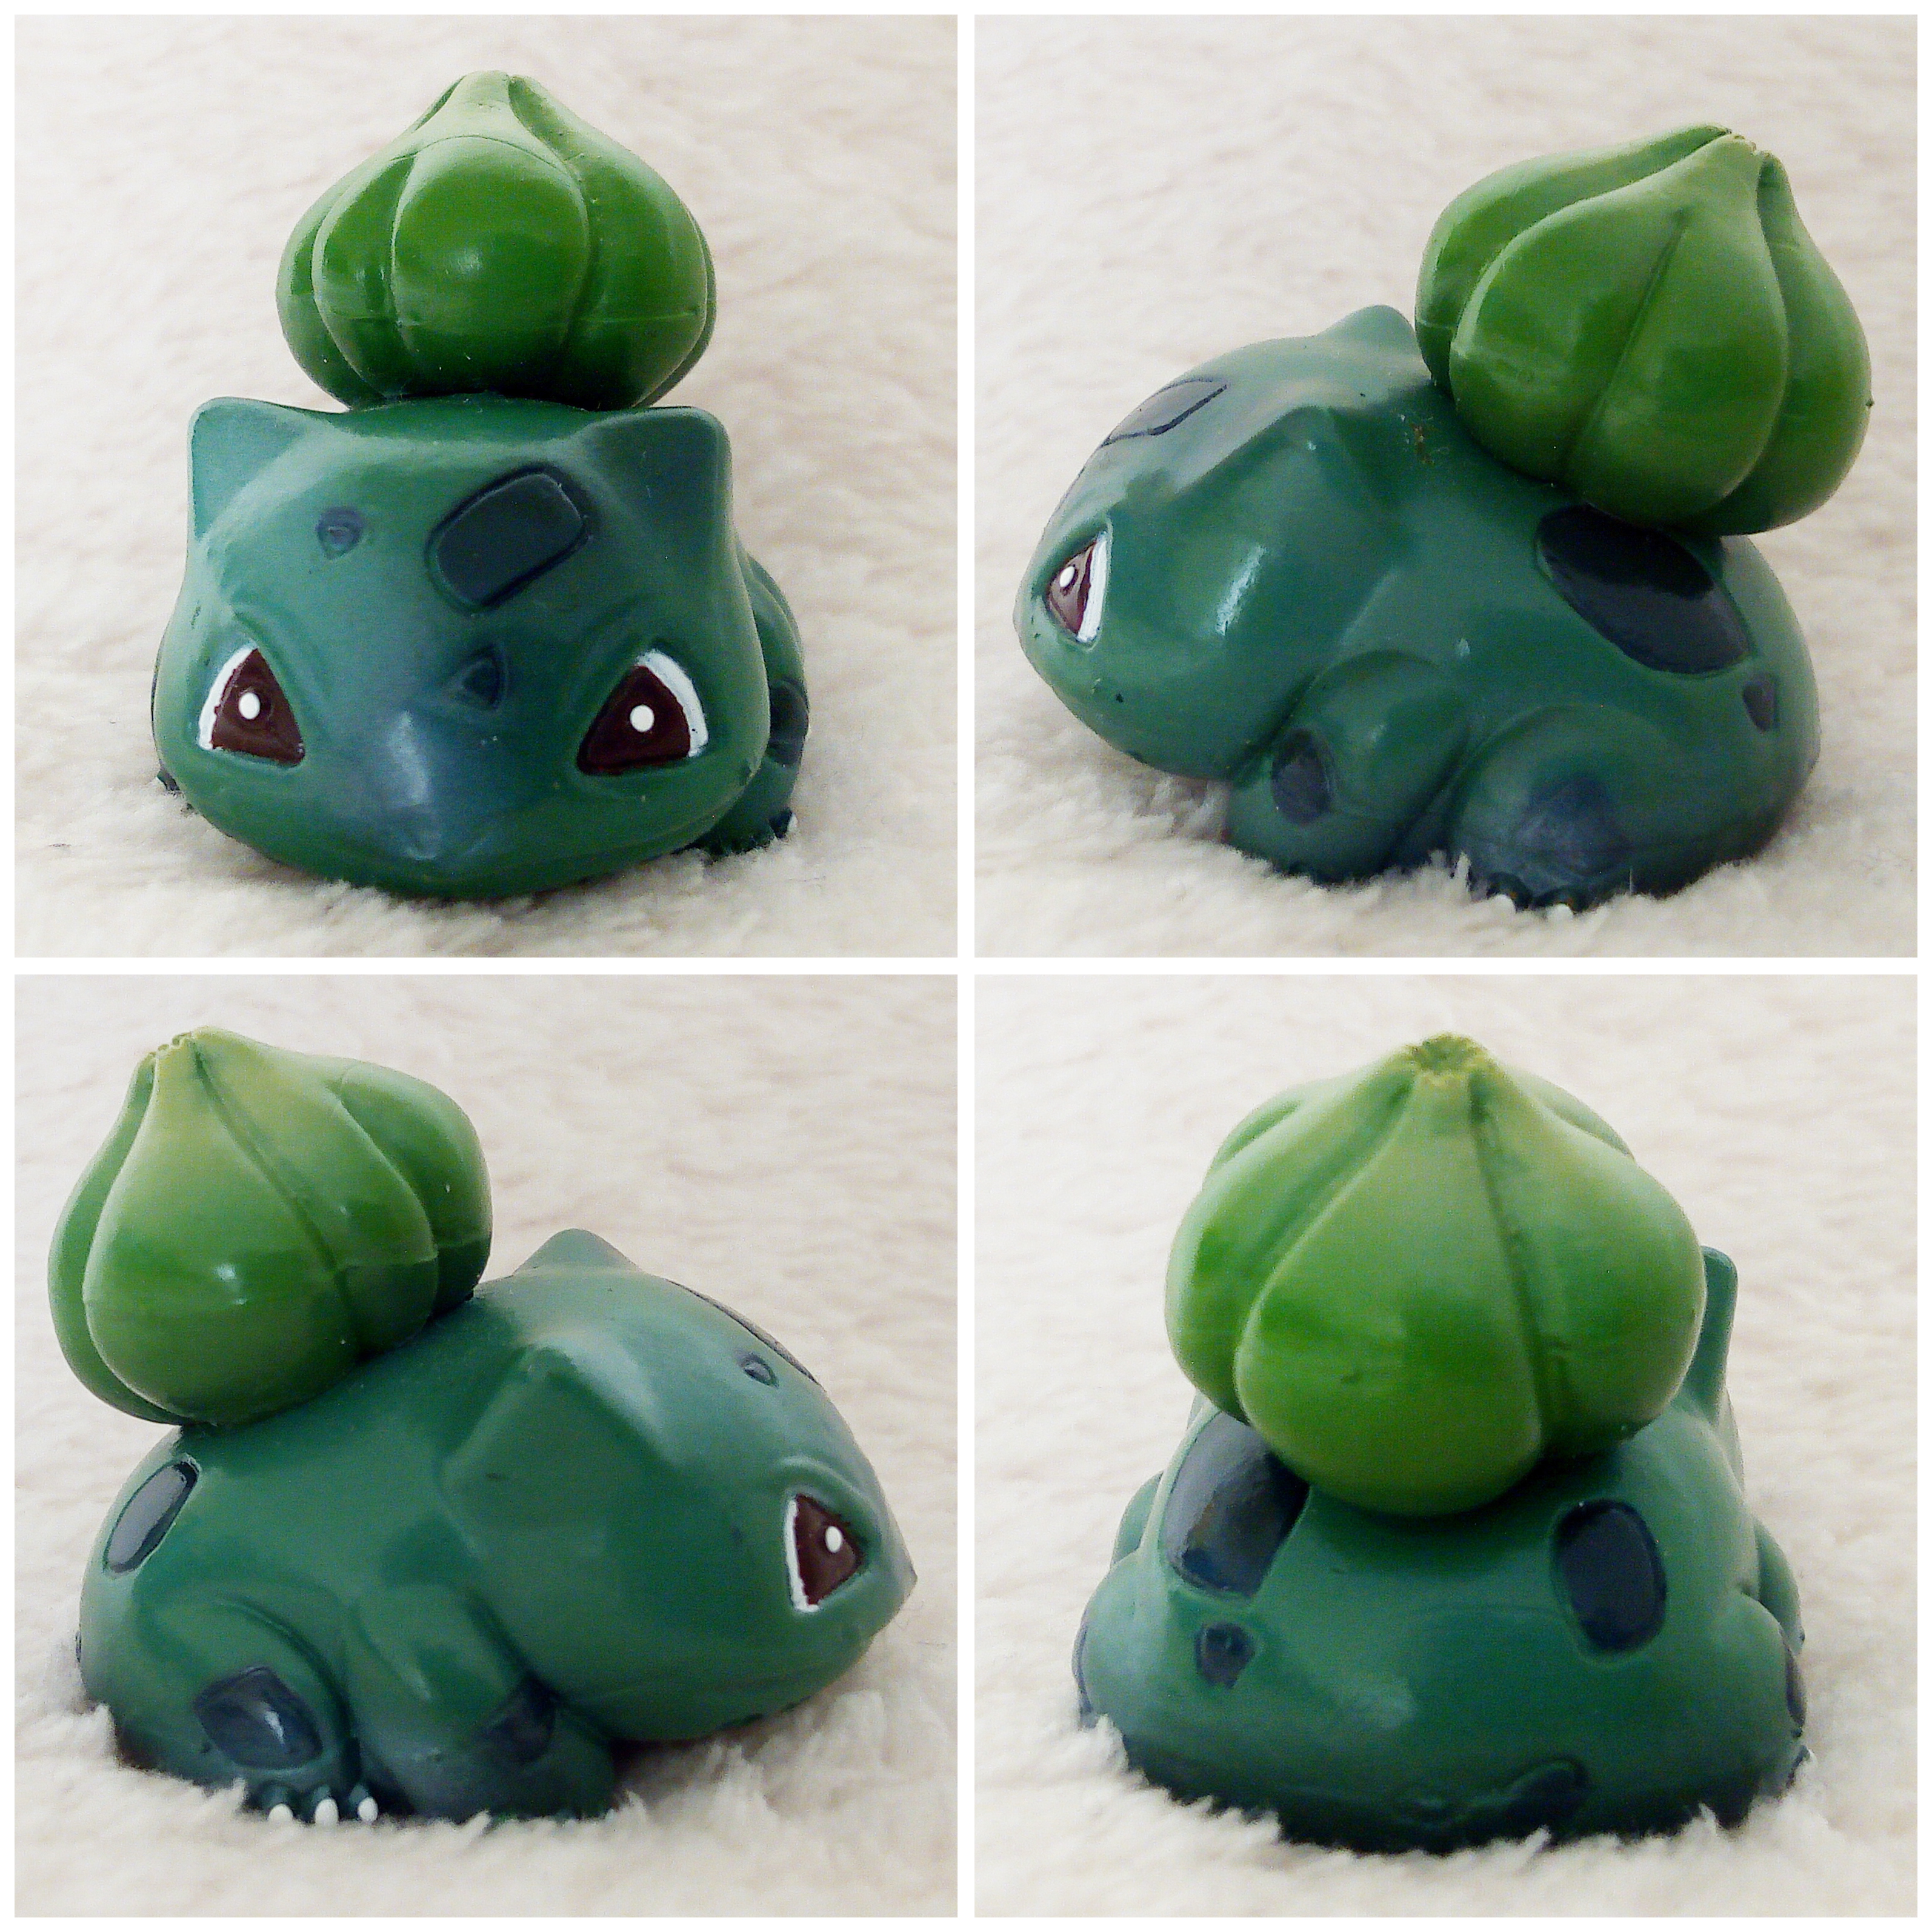 A front, left, right and back view of the Pokémon Tomy figure Bulbasaur